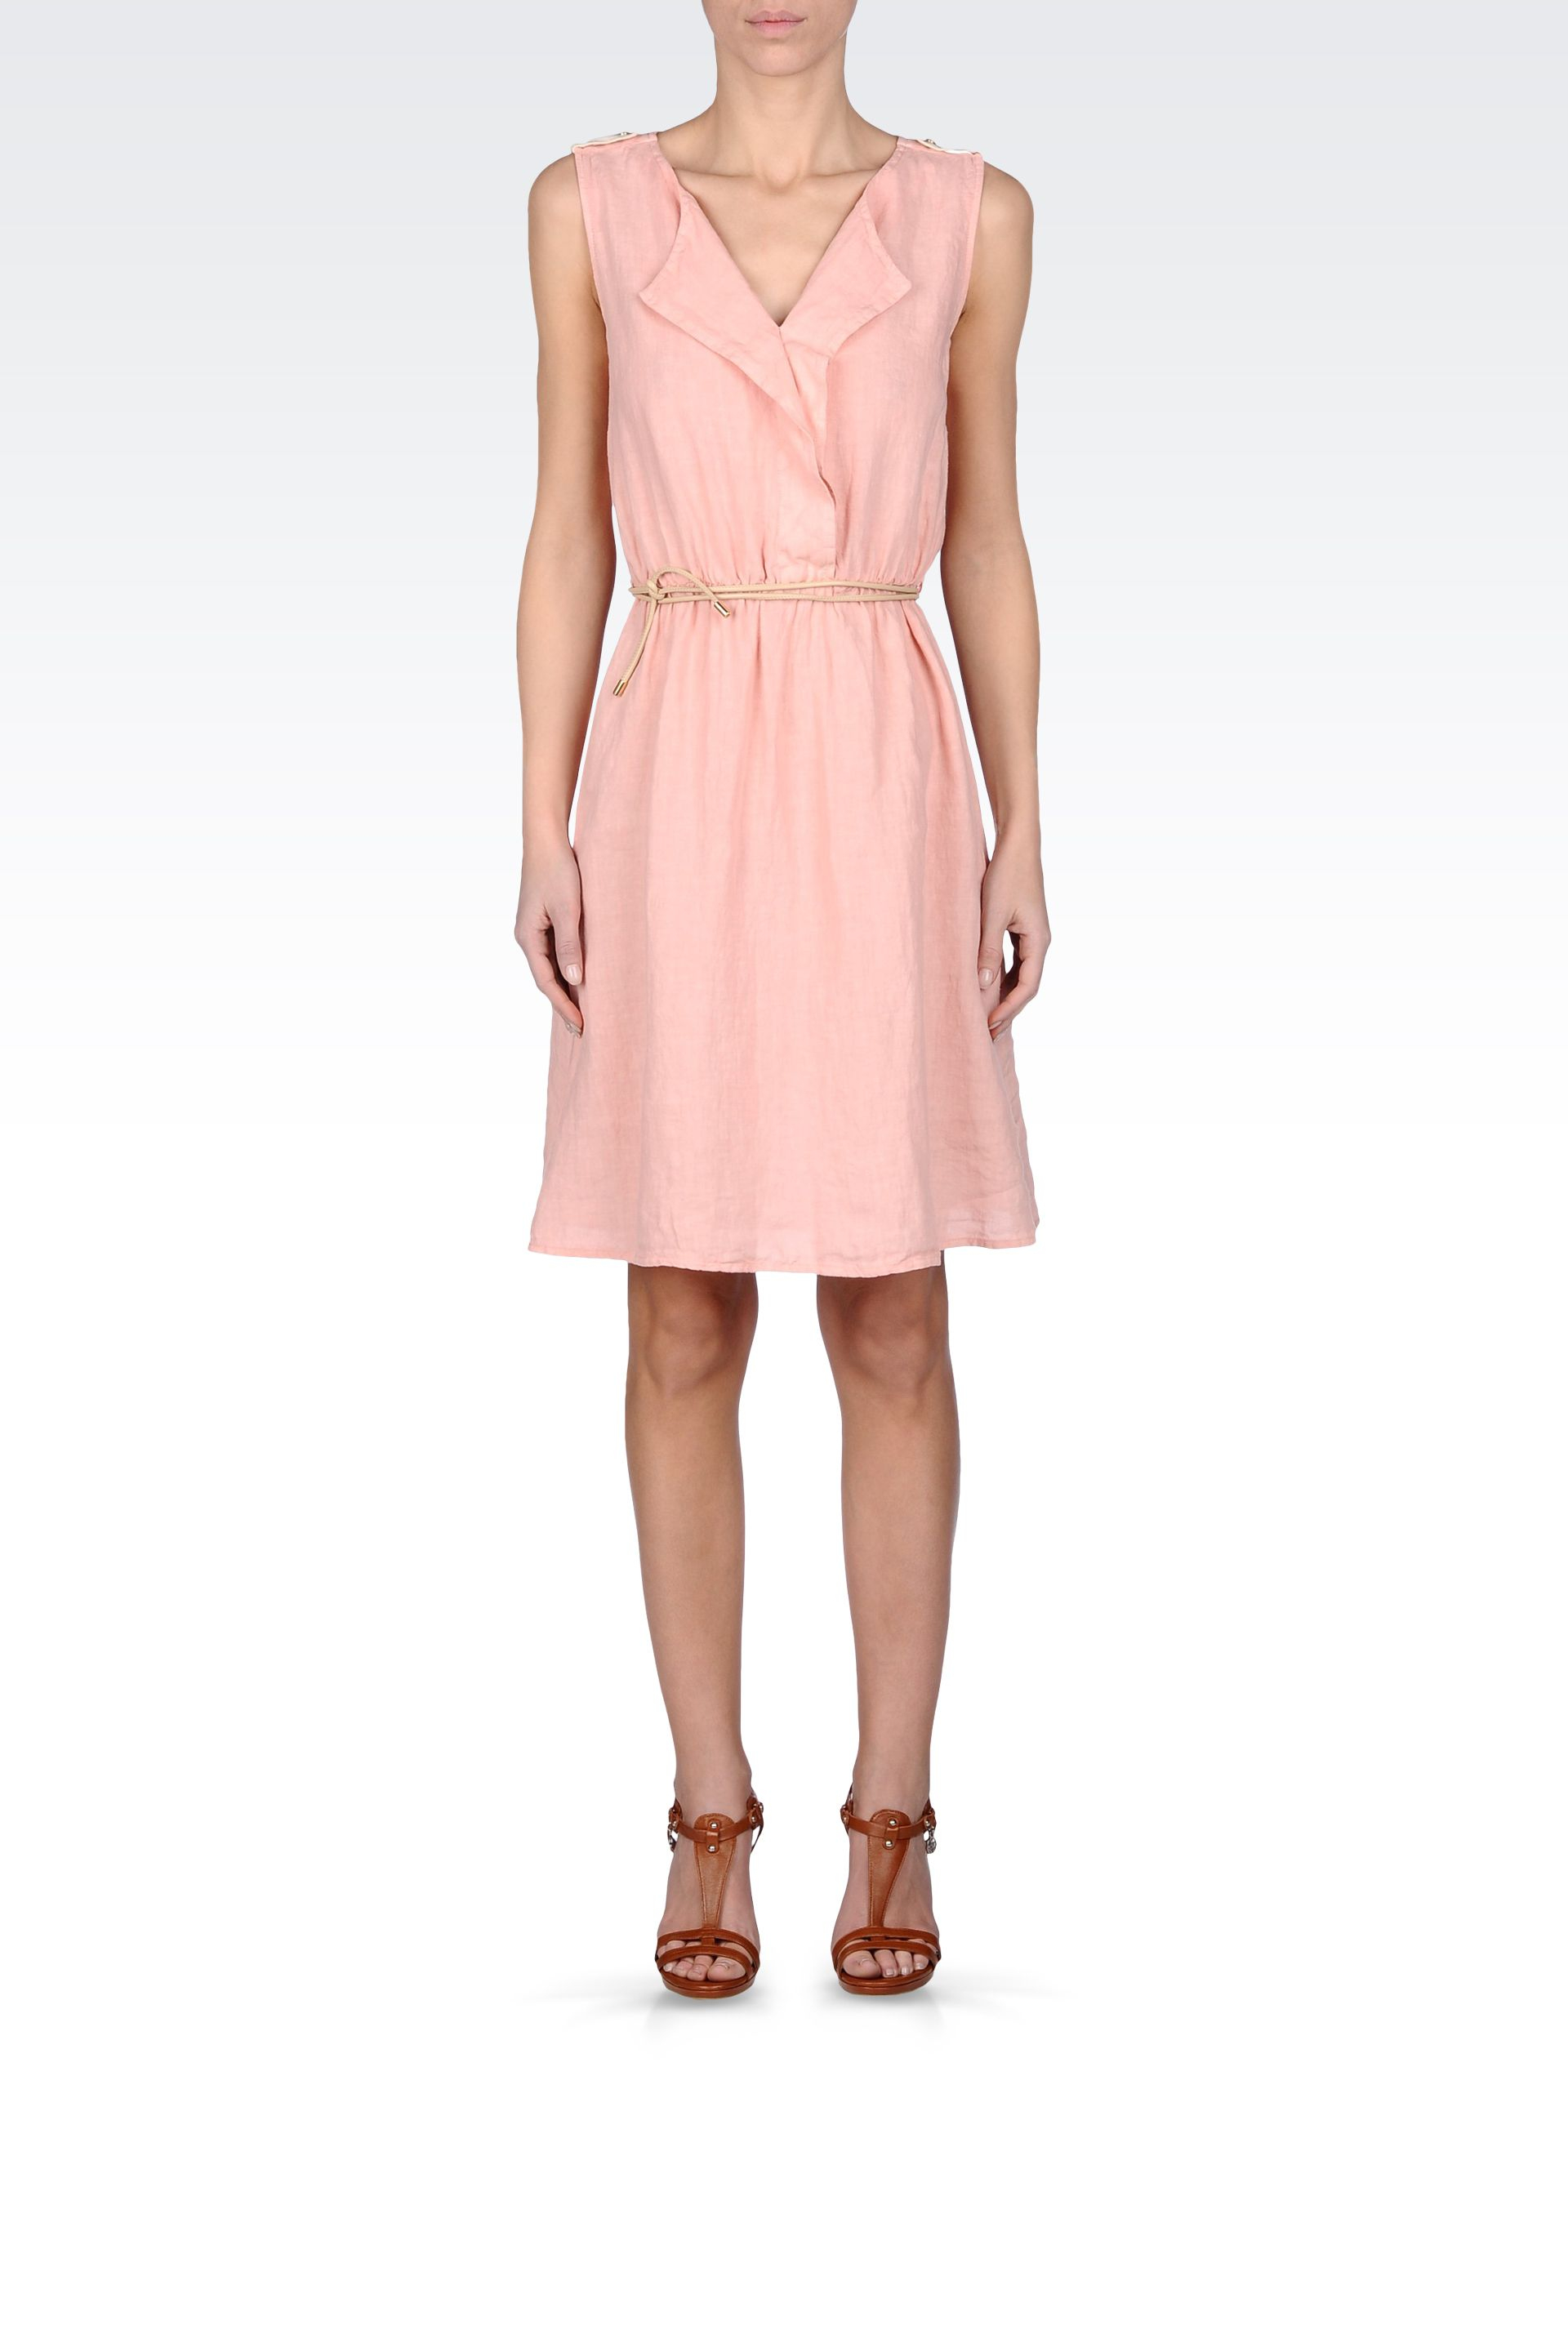 Armani jeans Linen Dress with Belted Waist in Pink - Lyst